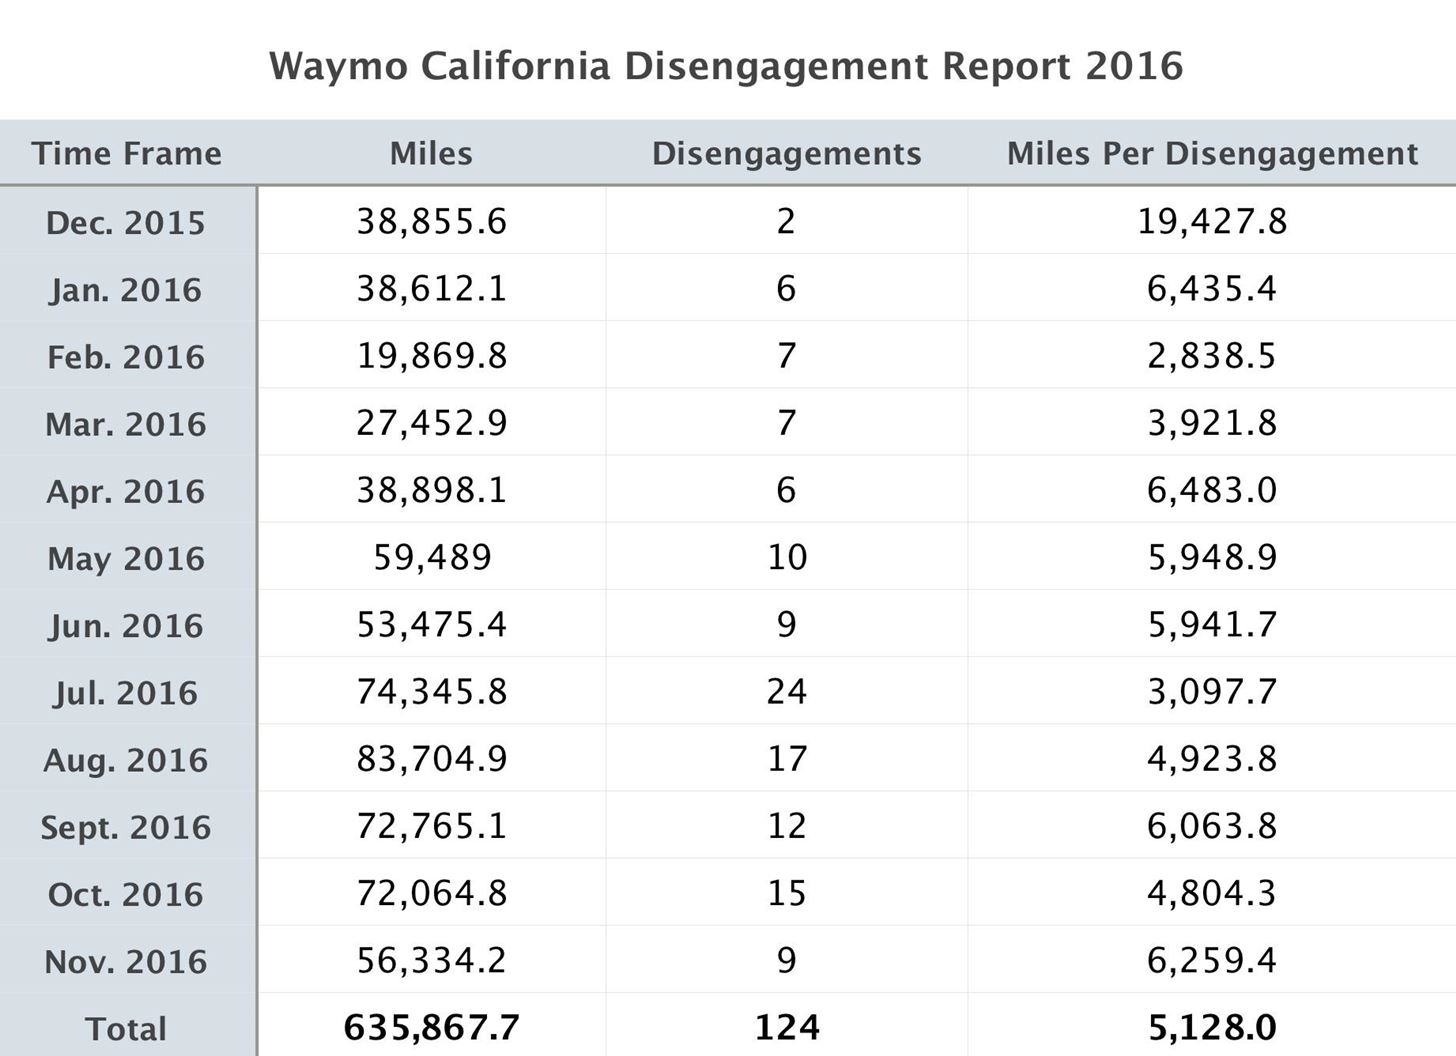 2016 Disengagement Reports Show Waymo Absolutely Crushing the Competition on Every Single Metric